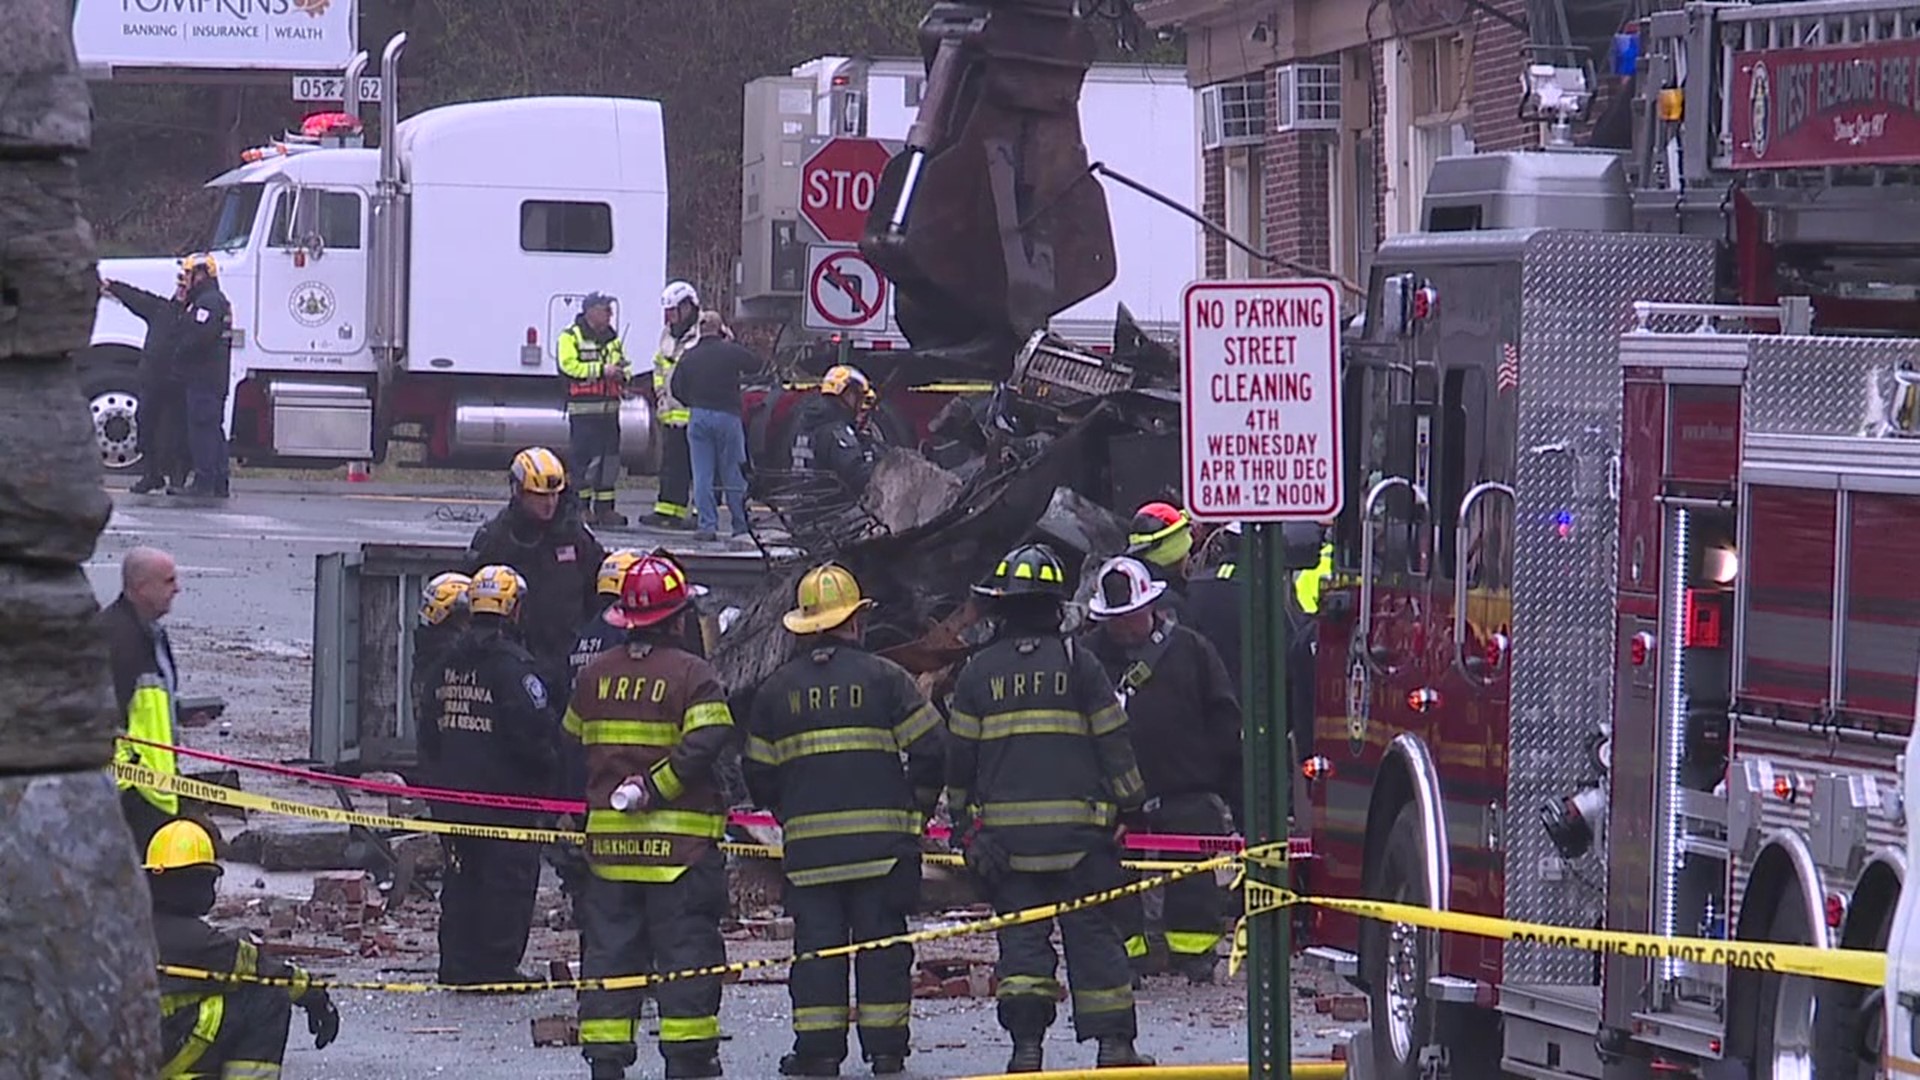 Rescue crews using dogs and imaging equipment continued to search through the rubble Saturday.